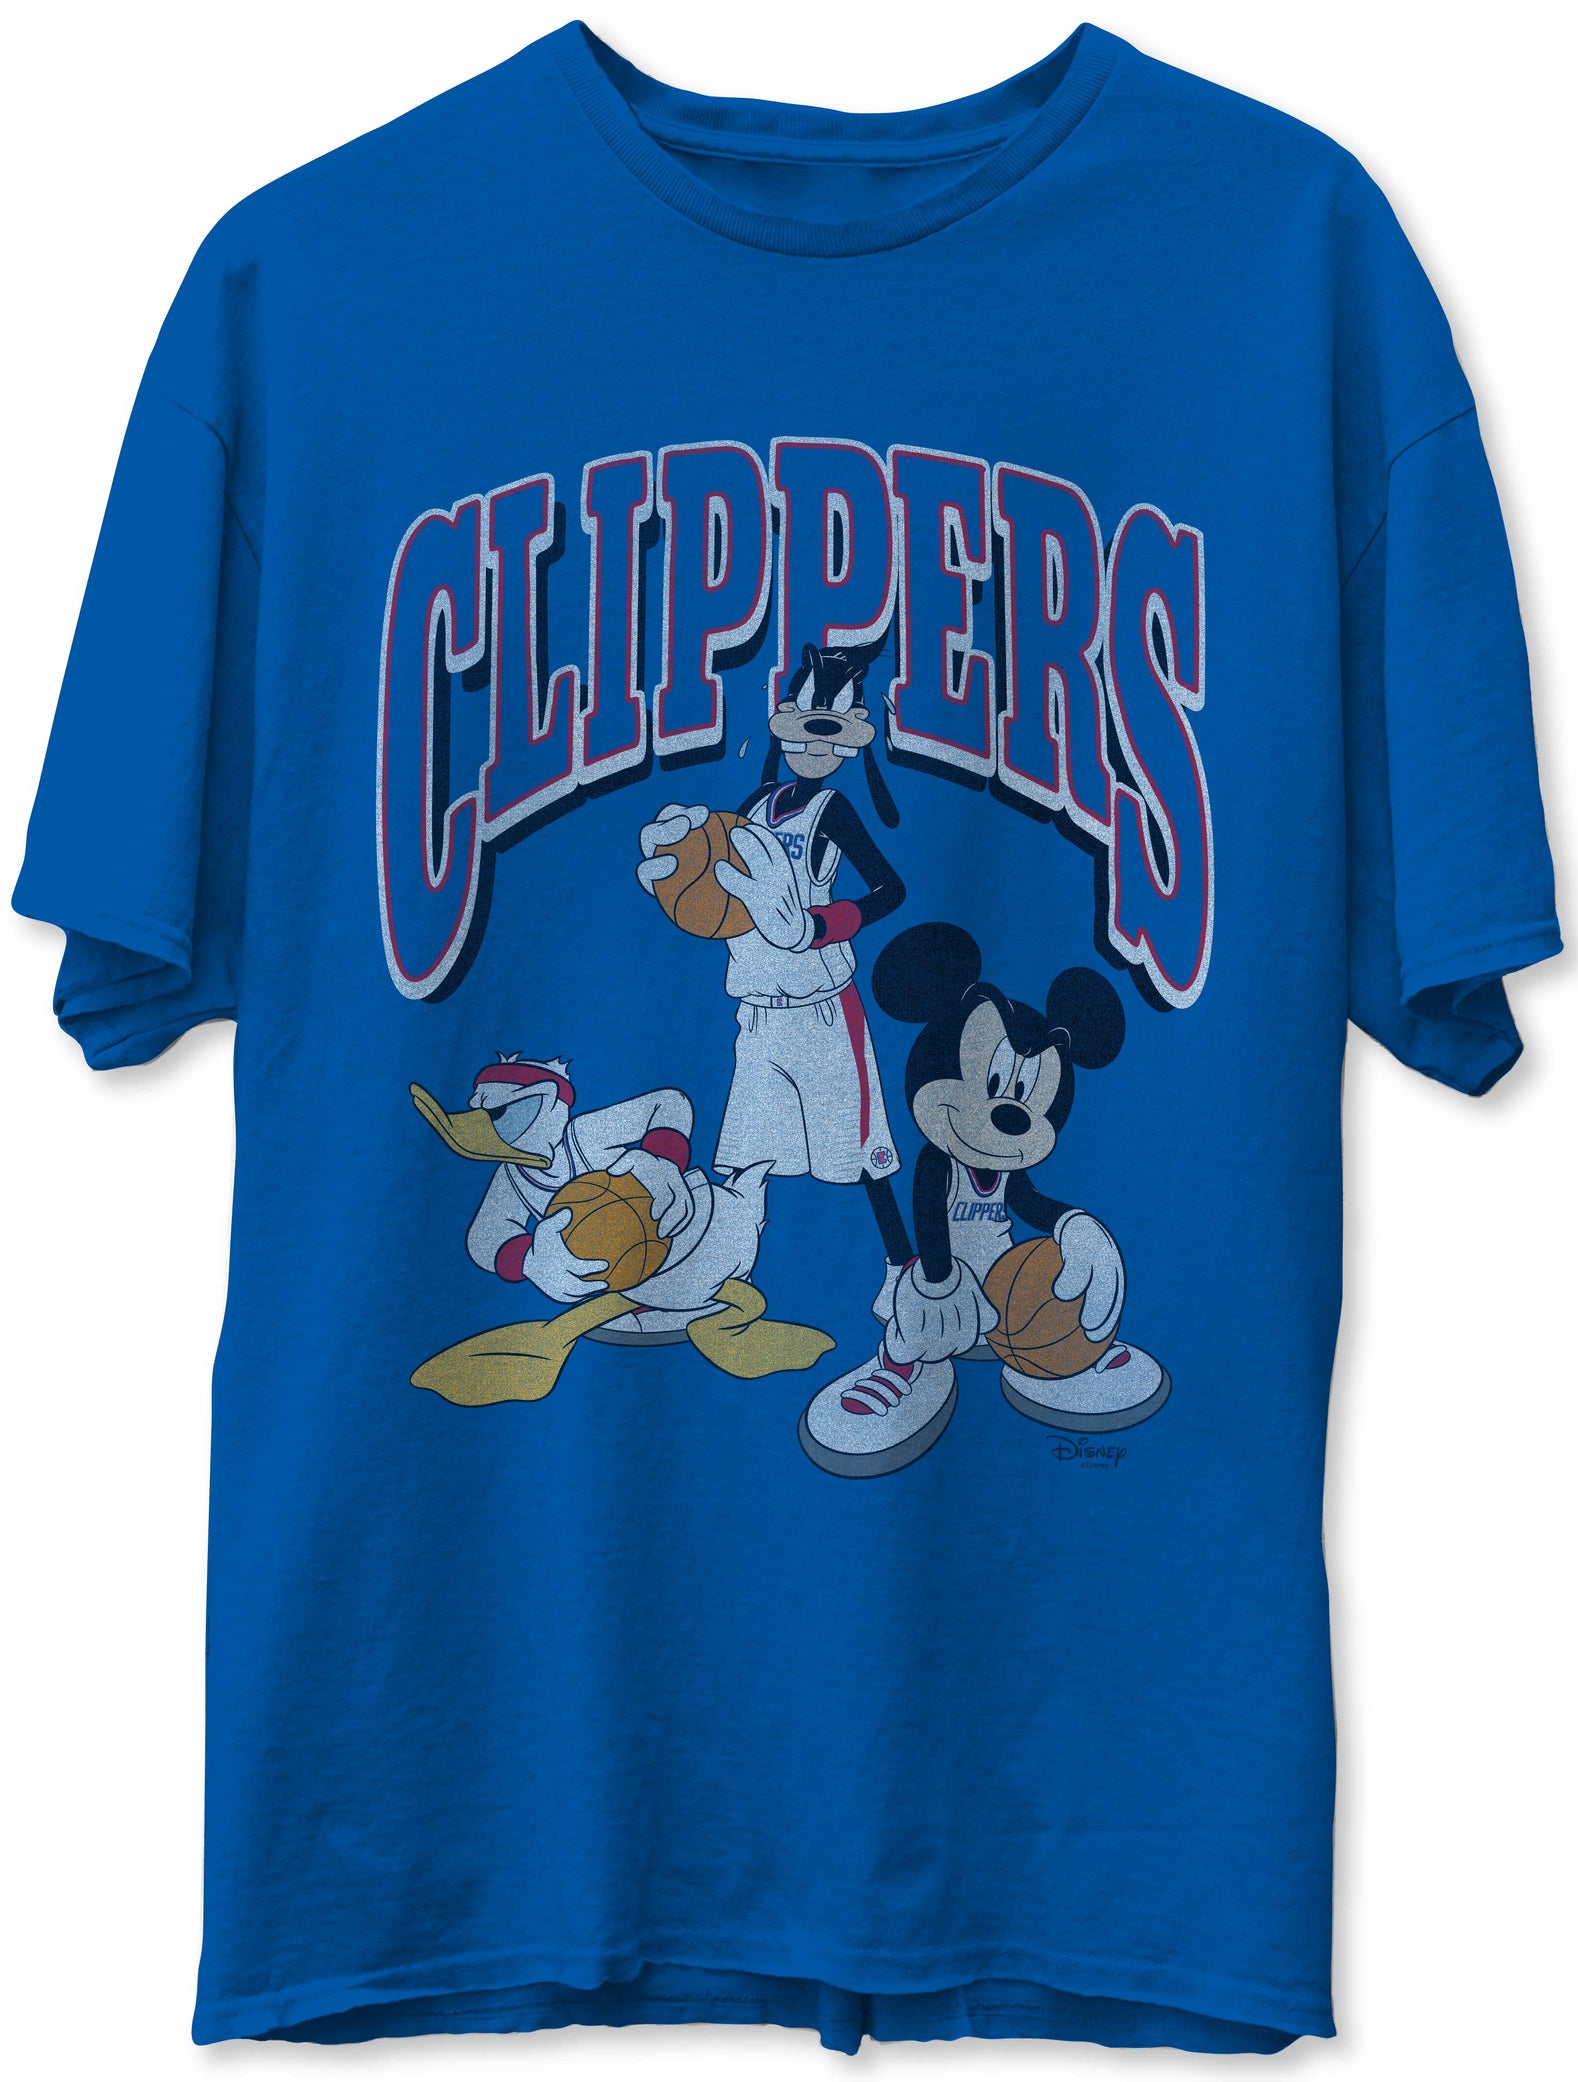 Los Angeles Lakers Mickey Squad Tee